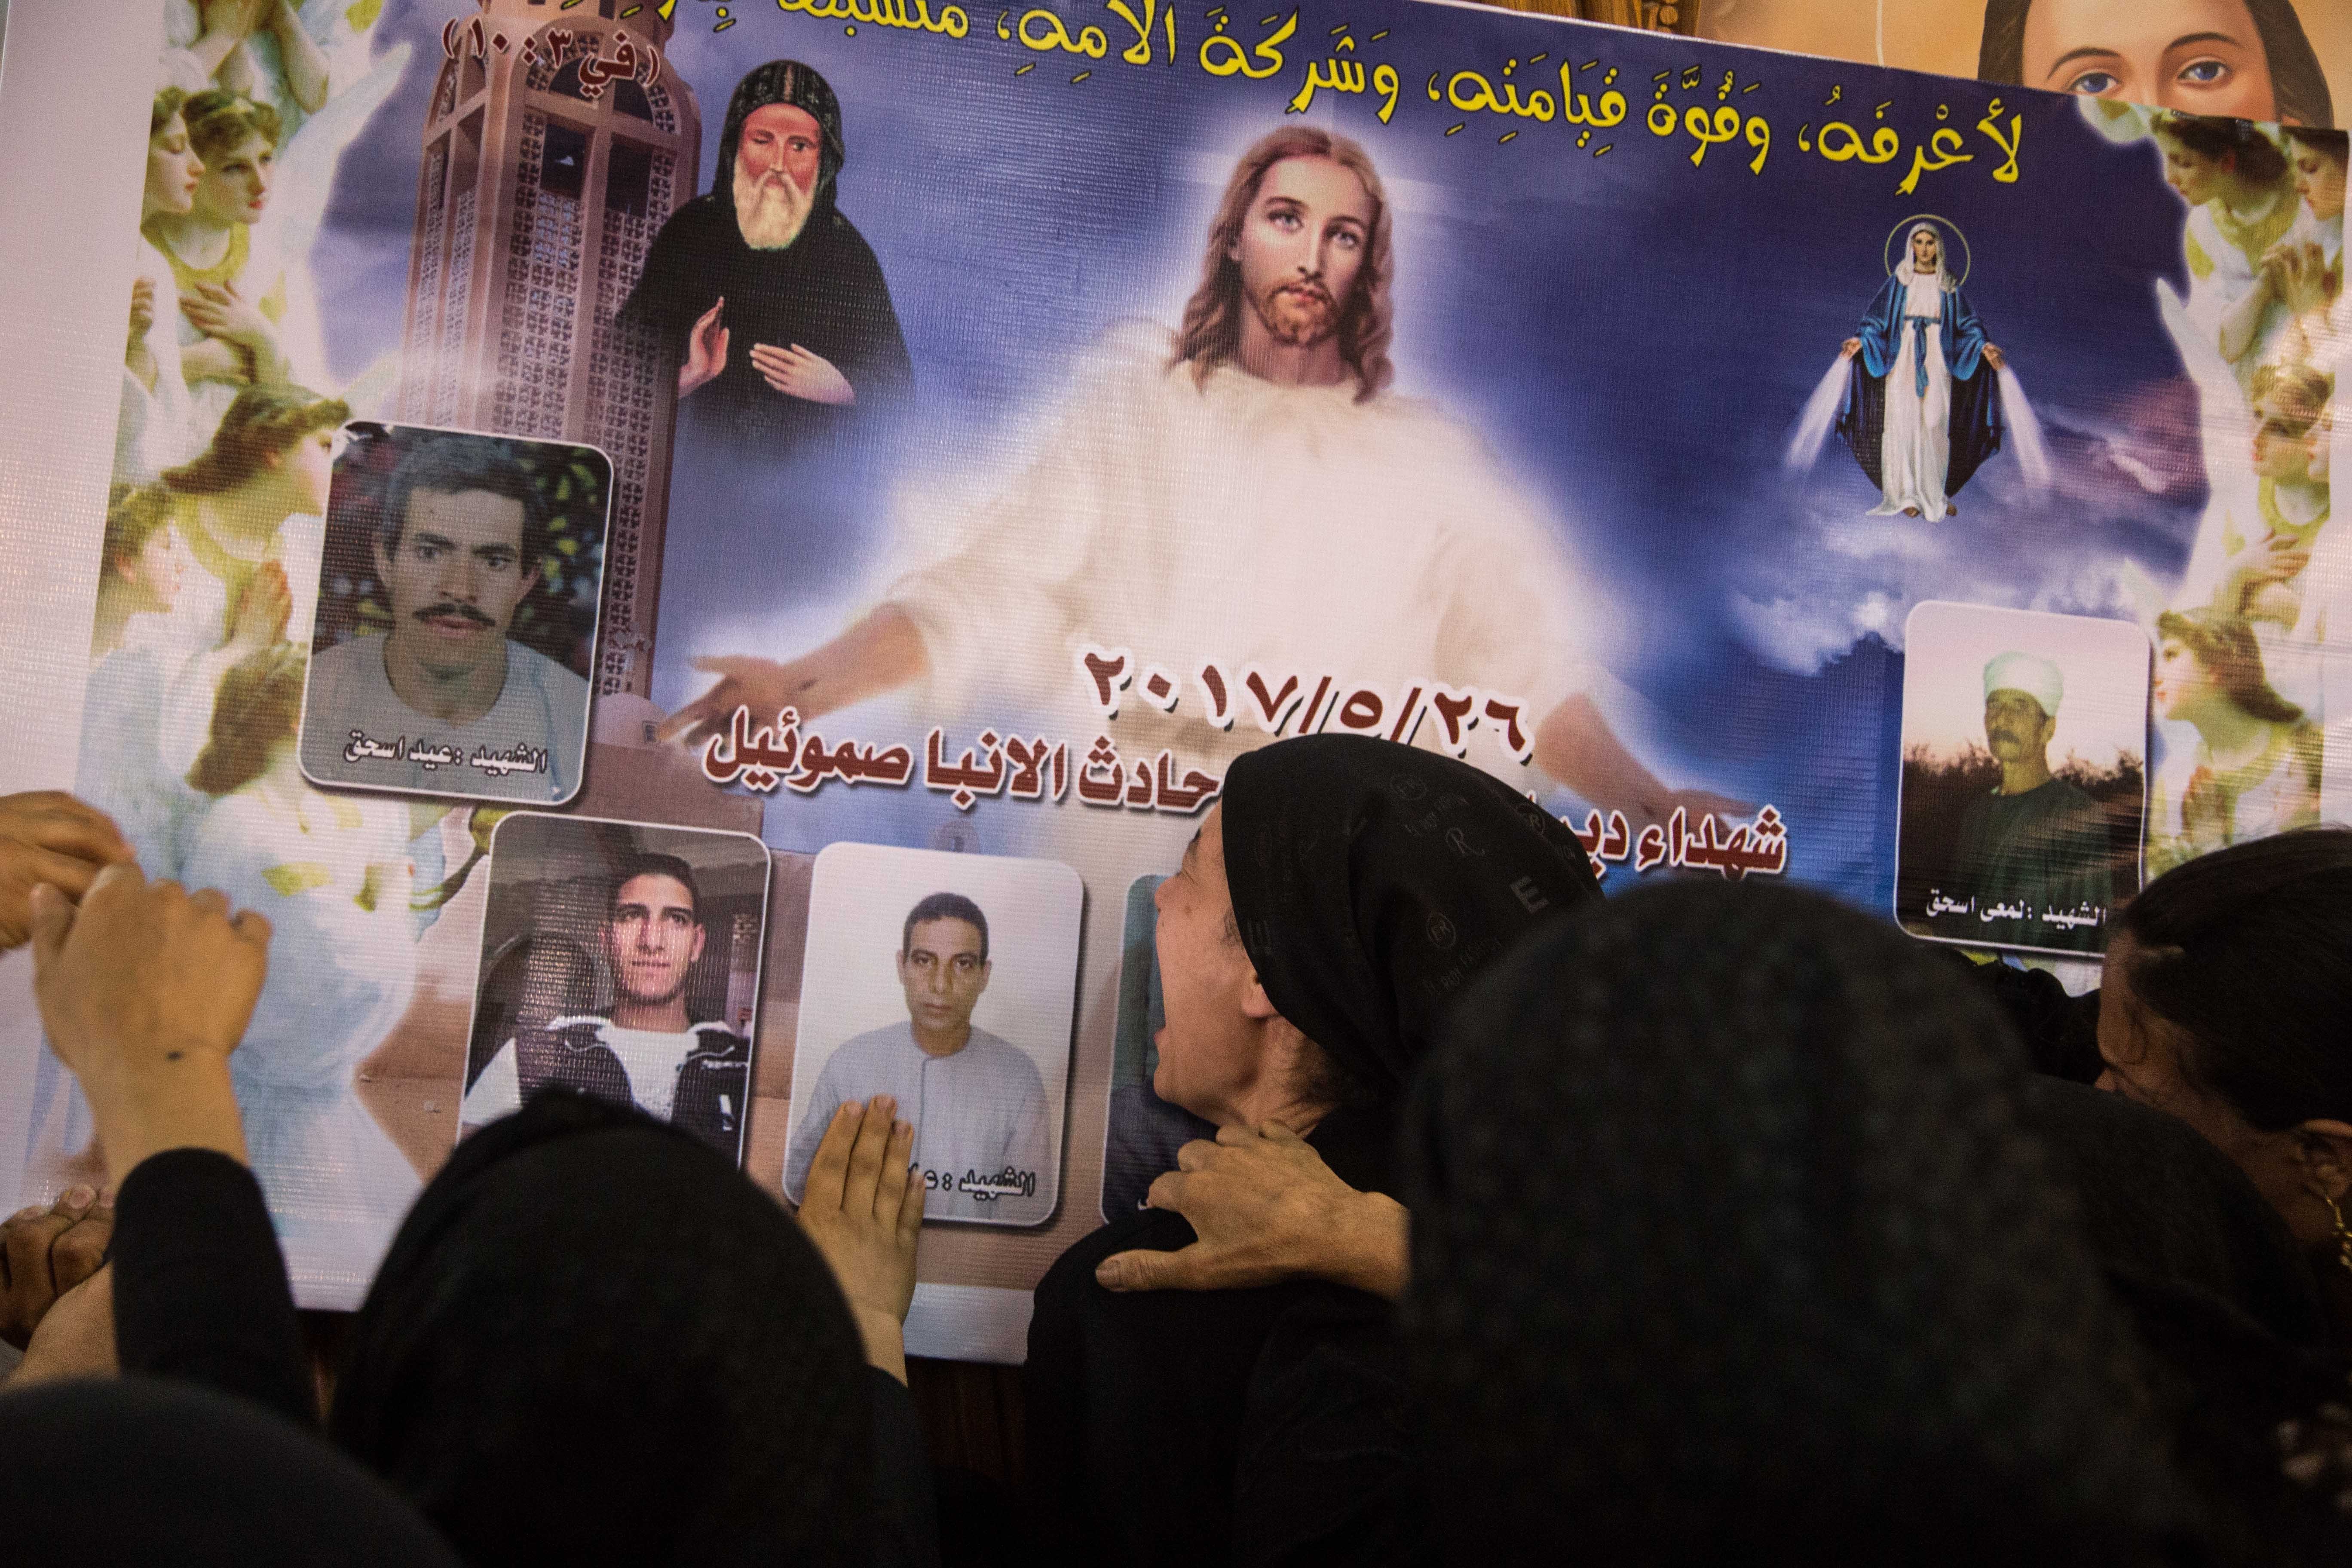 From the front line of Christian persecution in Egypt: 'If Jesus taught us anything, it is that there is always hope.'